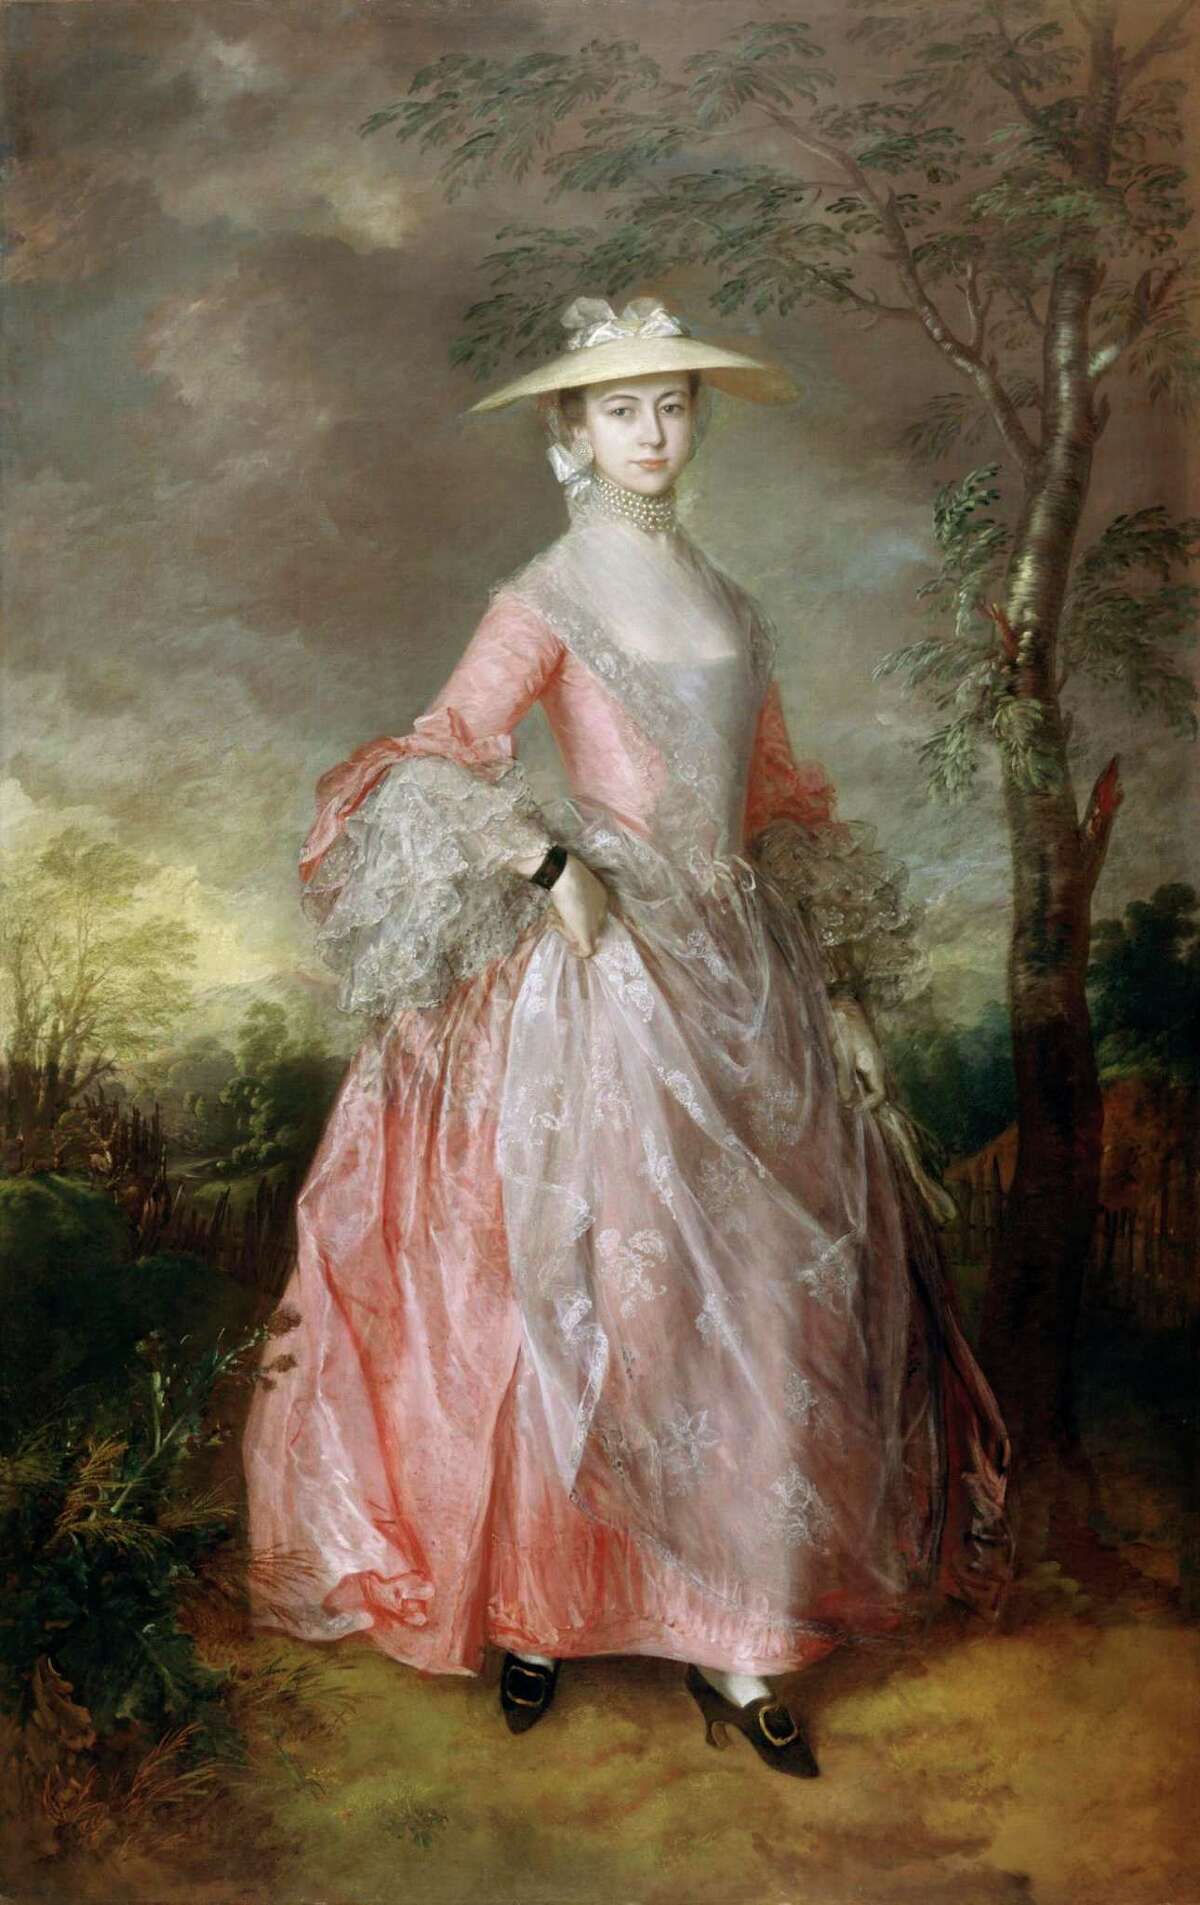 Thomas Gainsborough's "Mary, Countess Howe" is an icon of English beauty, renowned for its delicate details and the painter's beautifully imagined landscape.